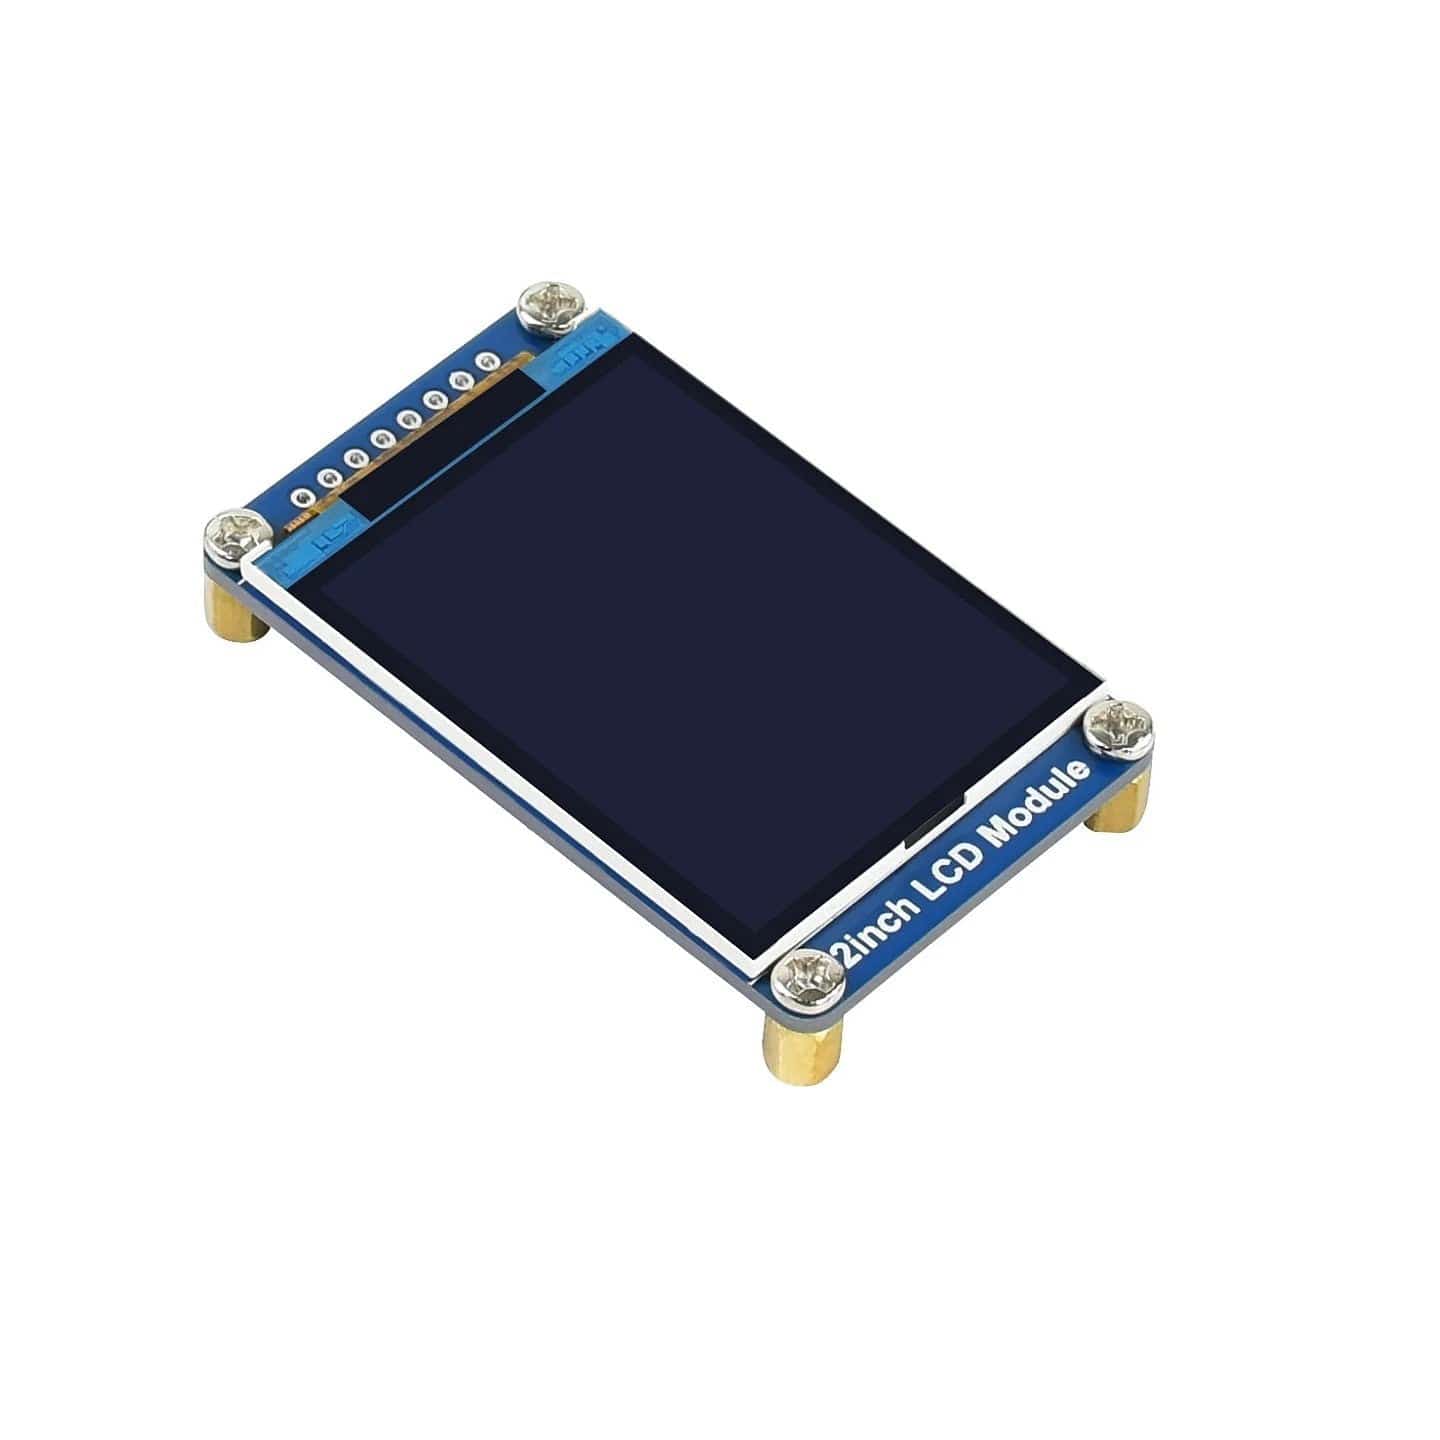 Waveshare 2 Inch LCD Display Module 240x320 for Raspberry Pi/Jetson Nano/Arduino/STM32 - RS3050 - REES52